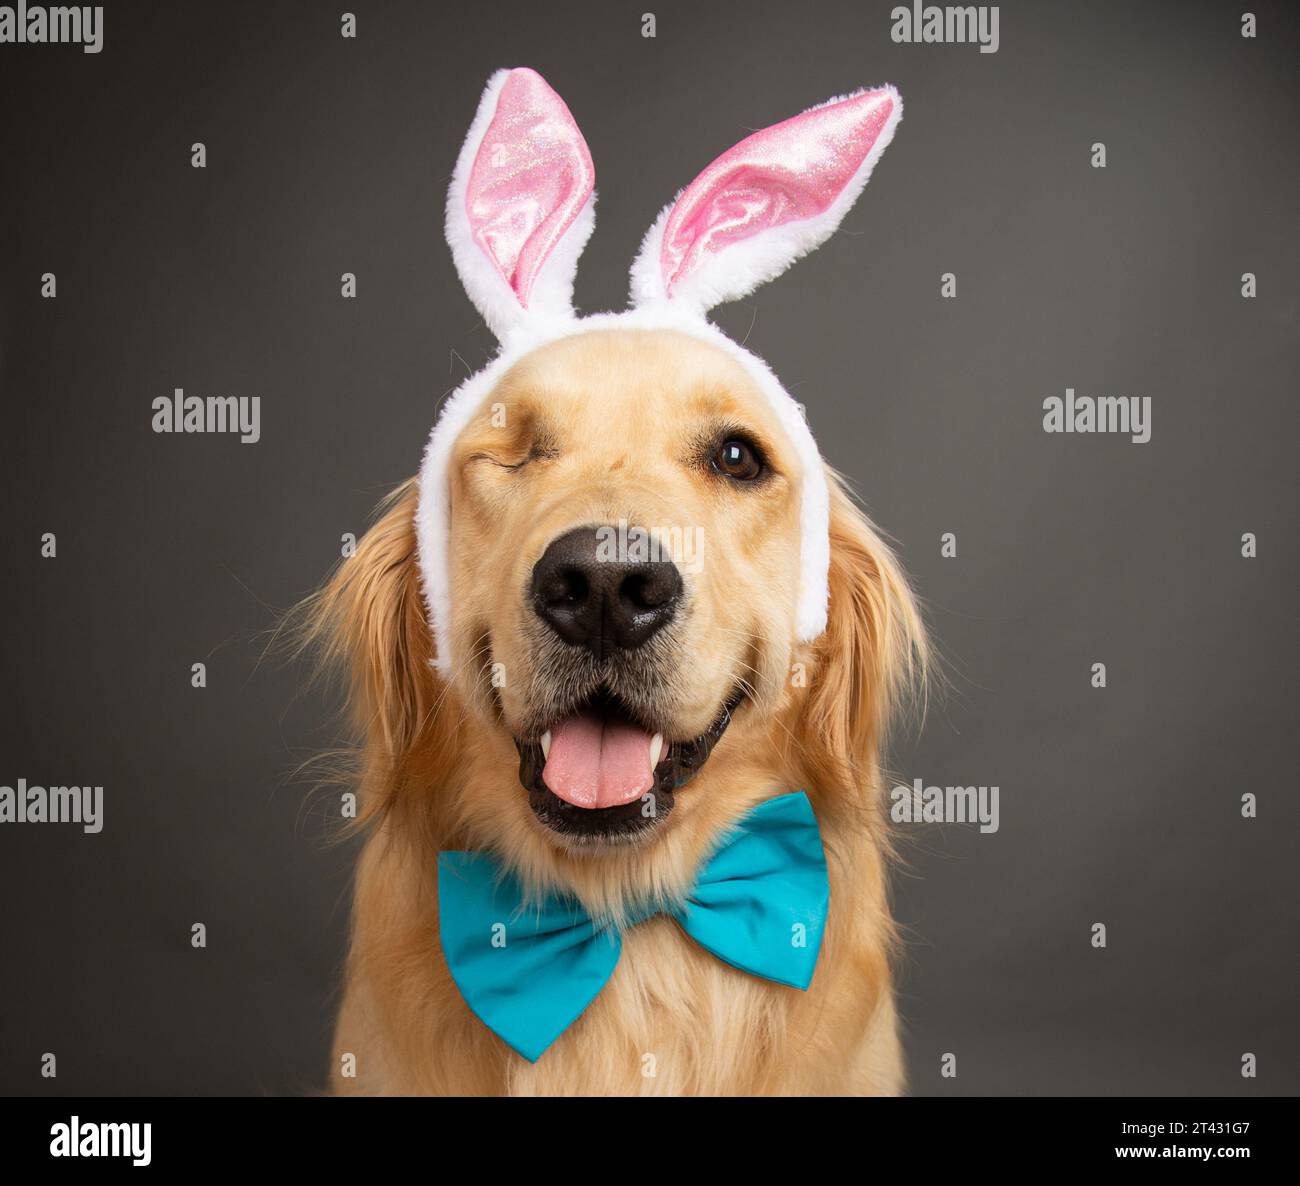 Portrait of a one eyed golden retriever wearing Easter bunny ears and a bow tie Stock Photo